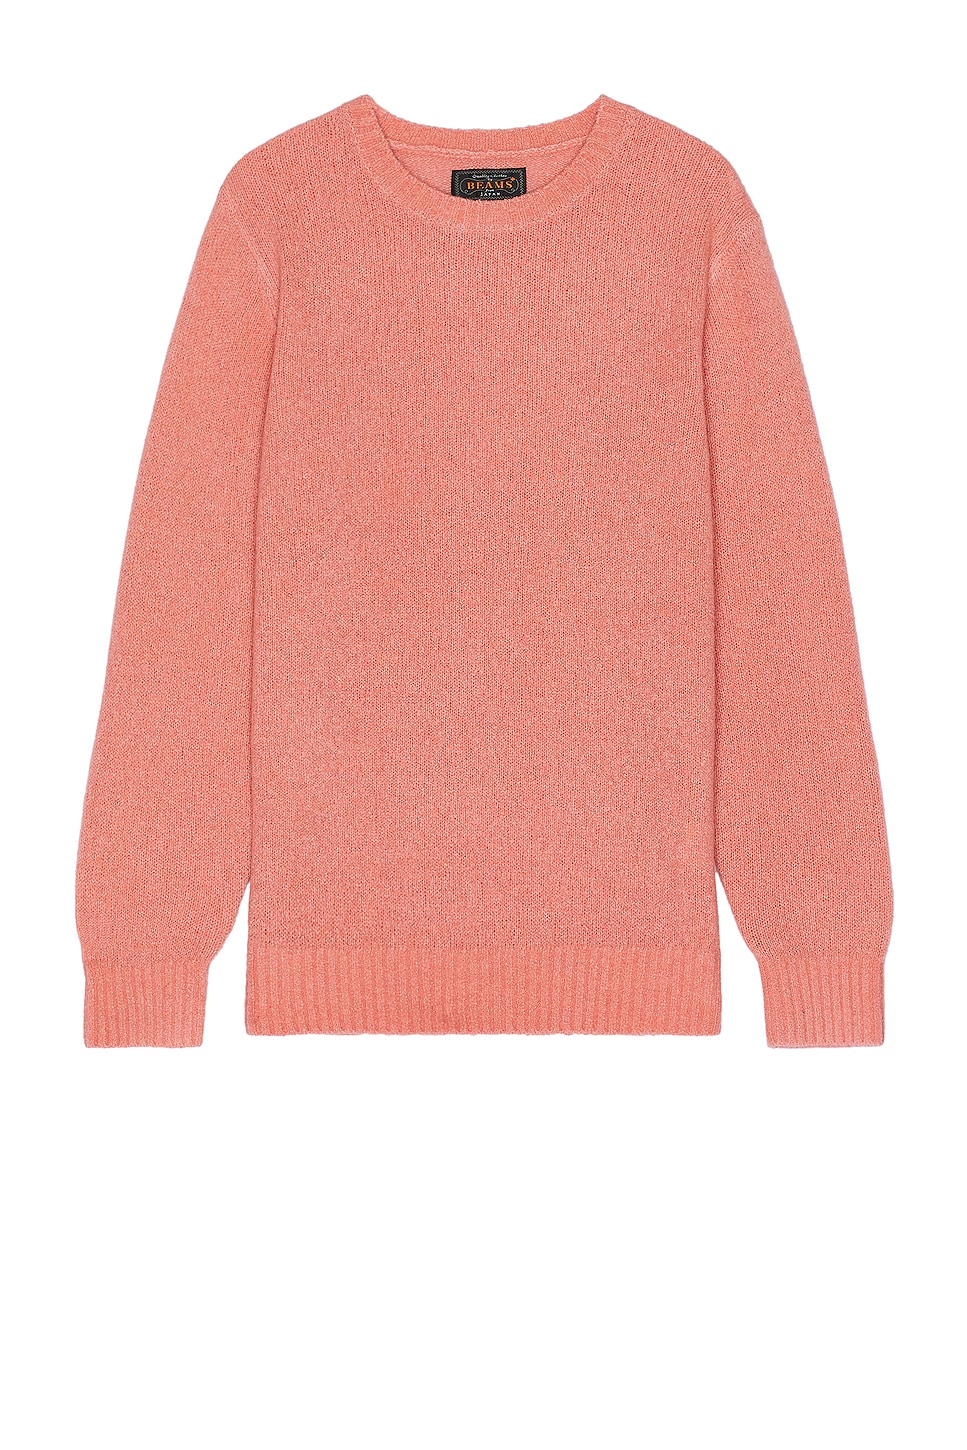 Crew Cashmere Sweater in Pink